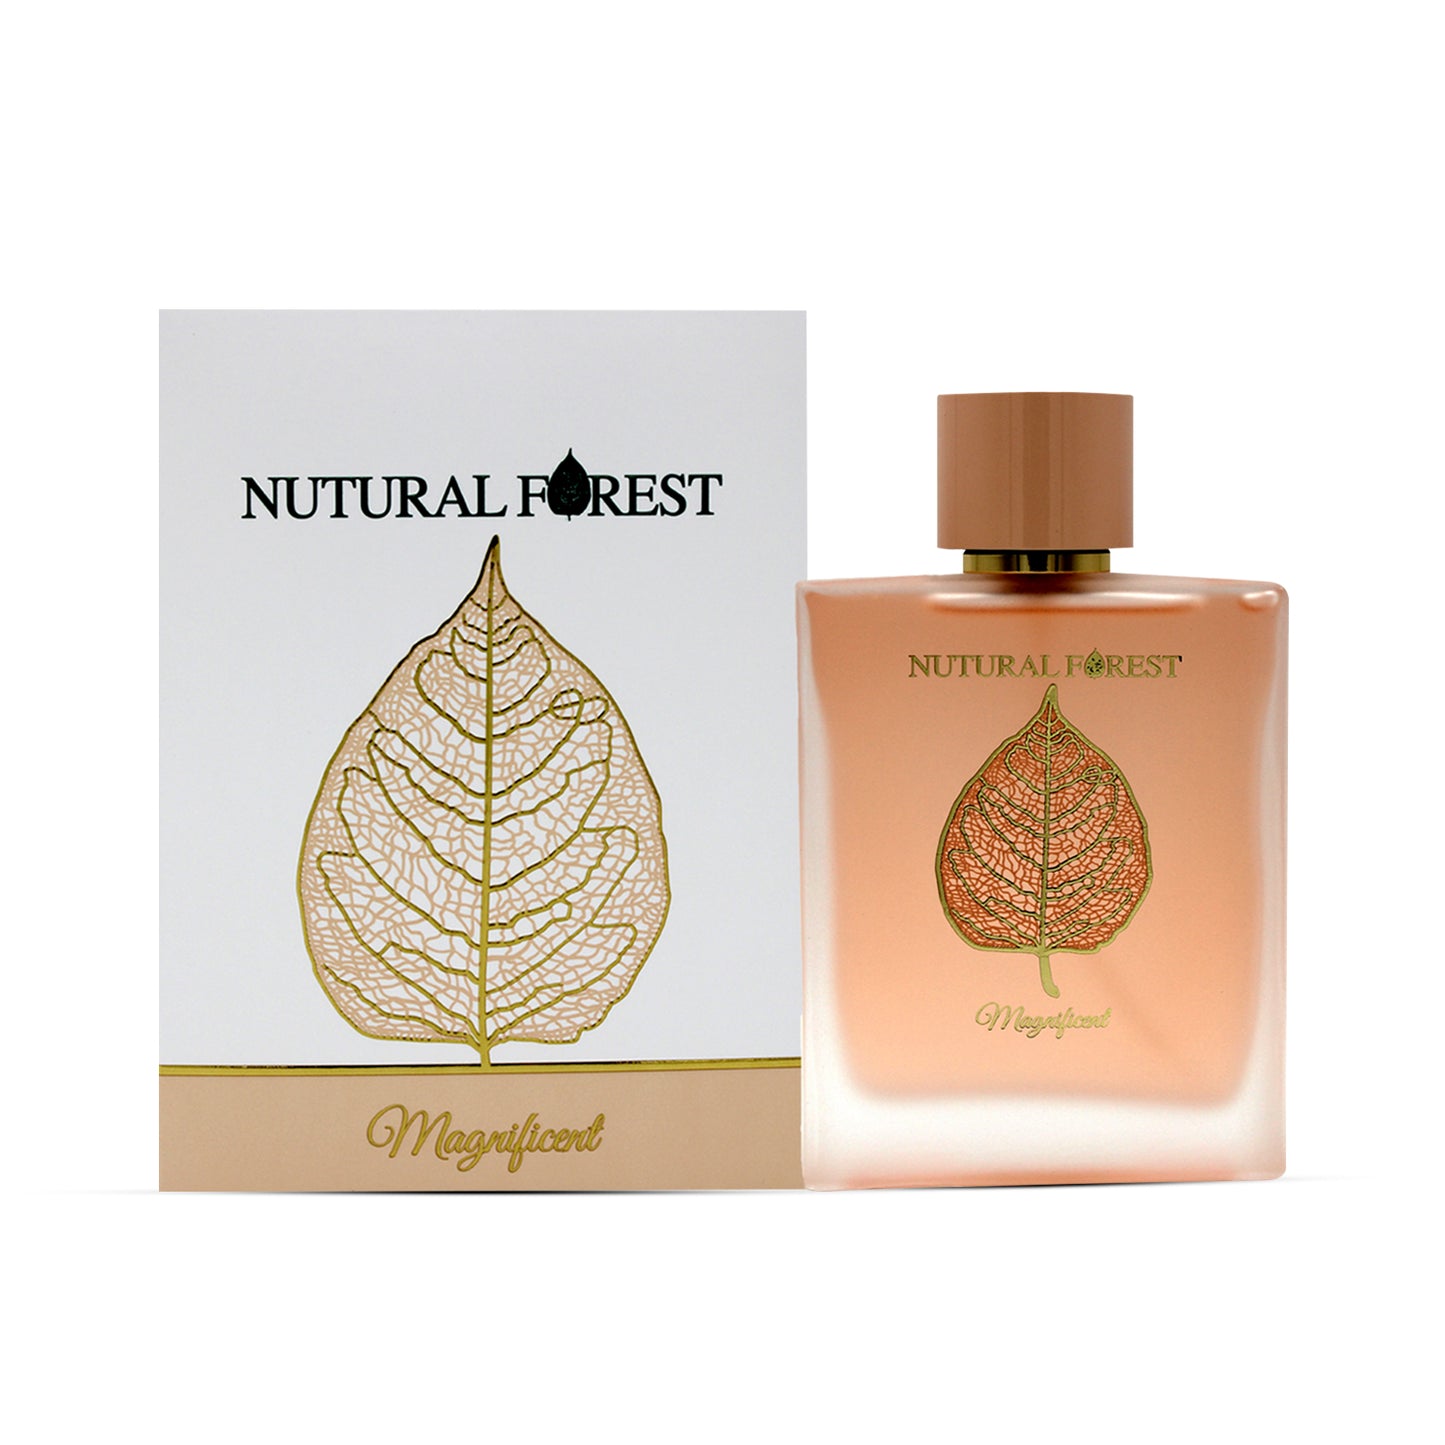 NUTURAL FOREST MAGNIFICENT EDP